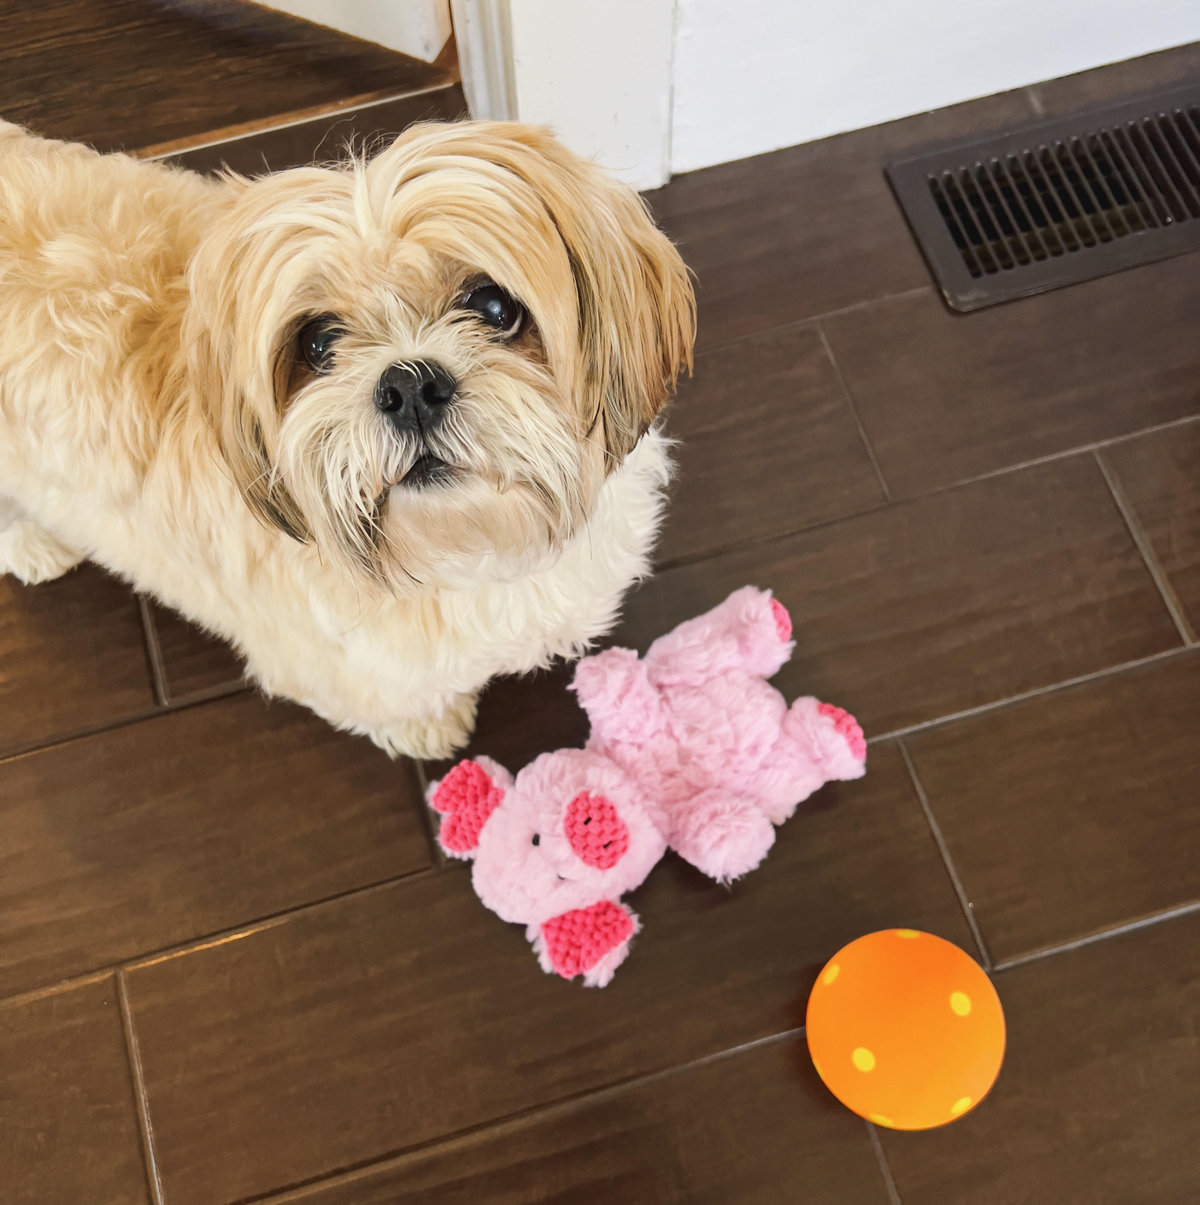 Shih Tzu playing with MultiPet dog toys